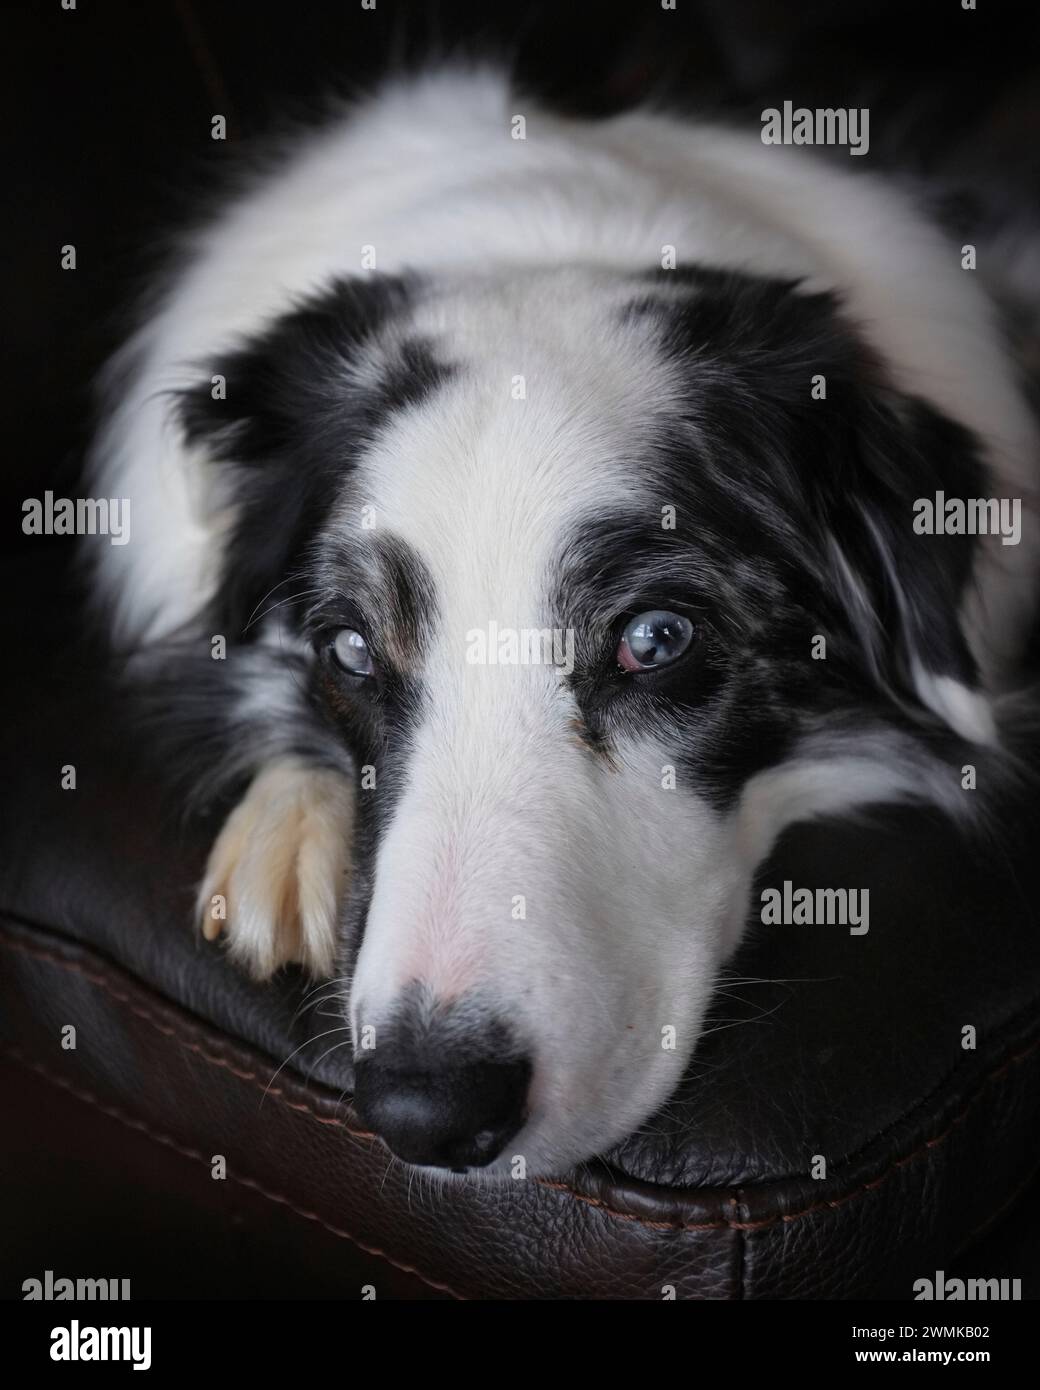 Close-up portrait of a blue-eyed dog resting on furniture Stock Photo